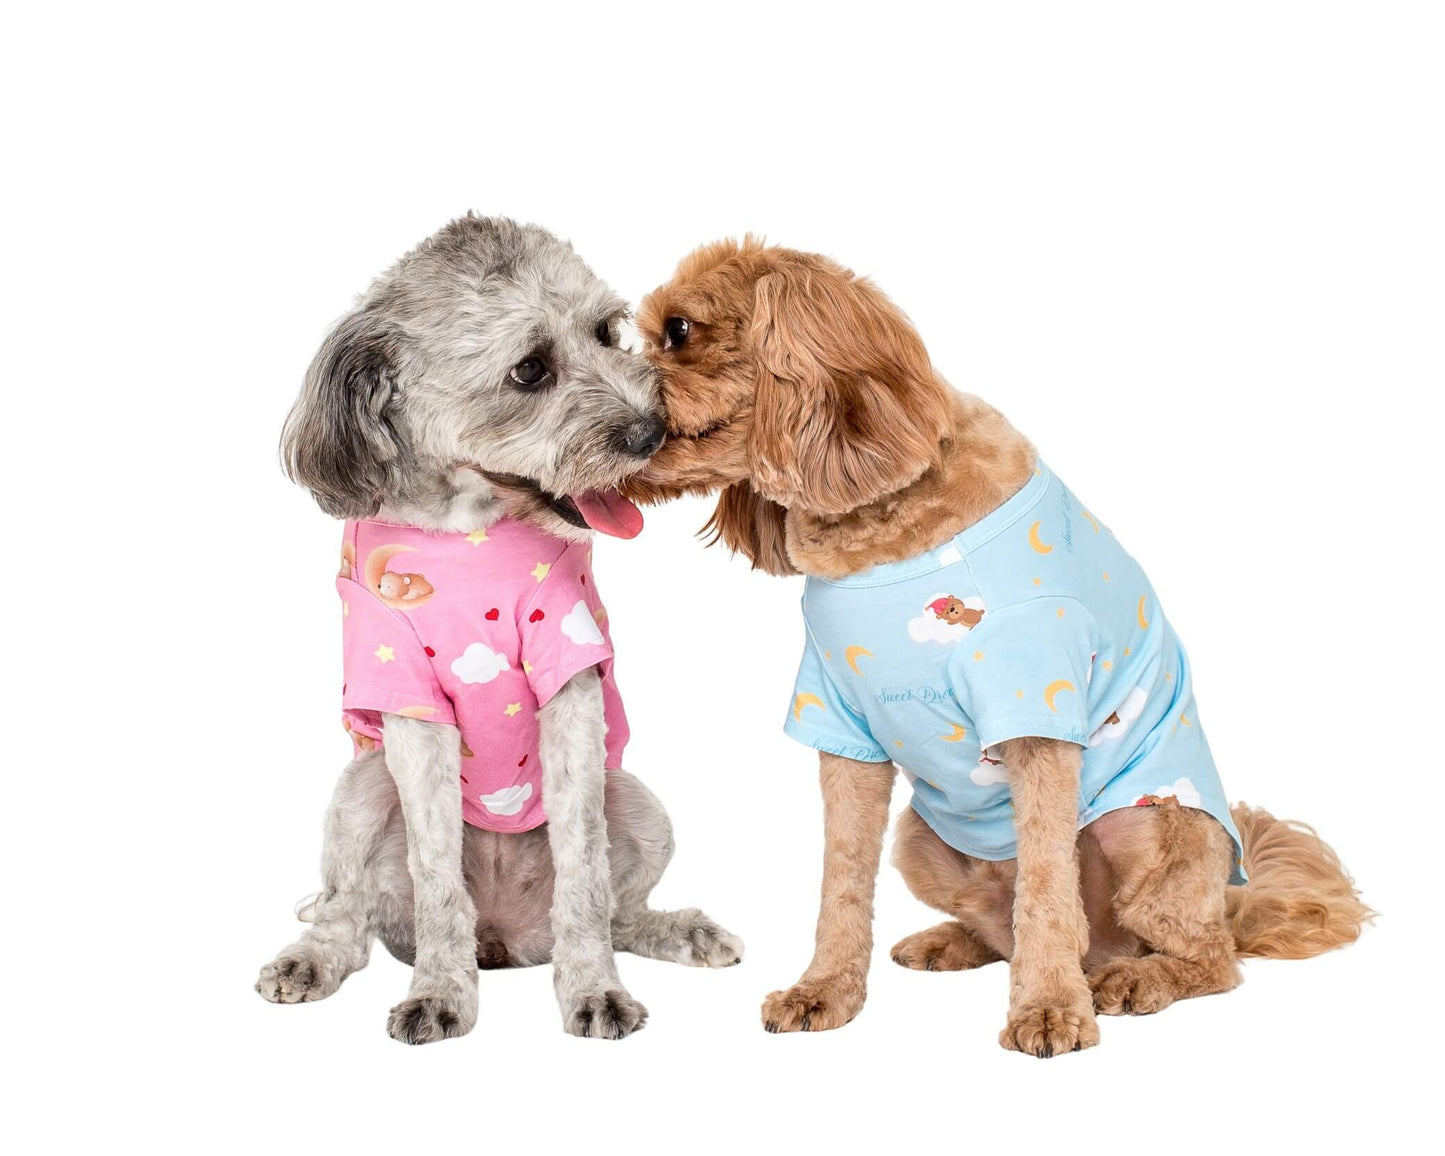 Two Cavoodles wearing Vibrant Hound Lil Dreamrr dog pyjamas. One is in pink and the other is blue.